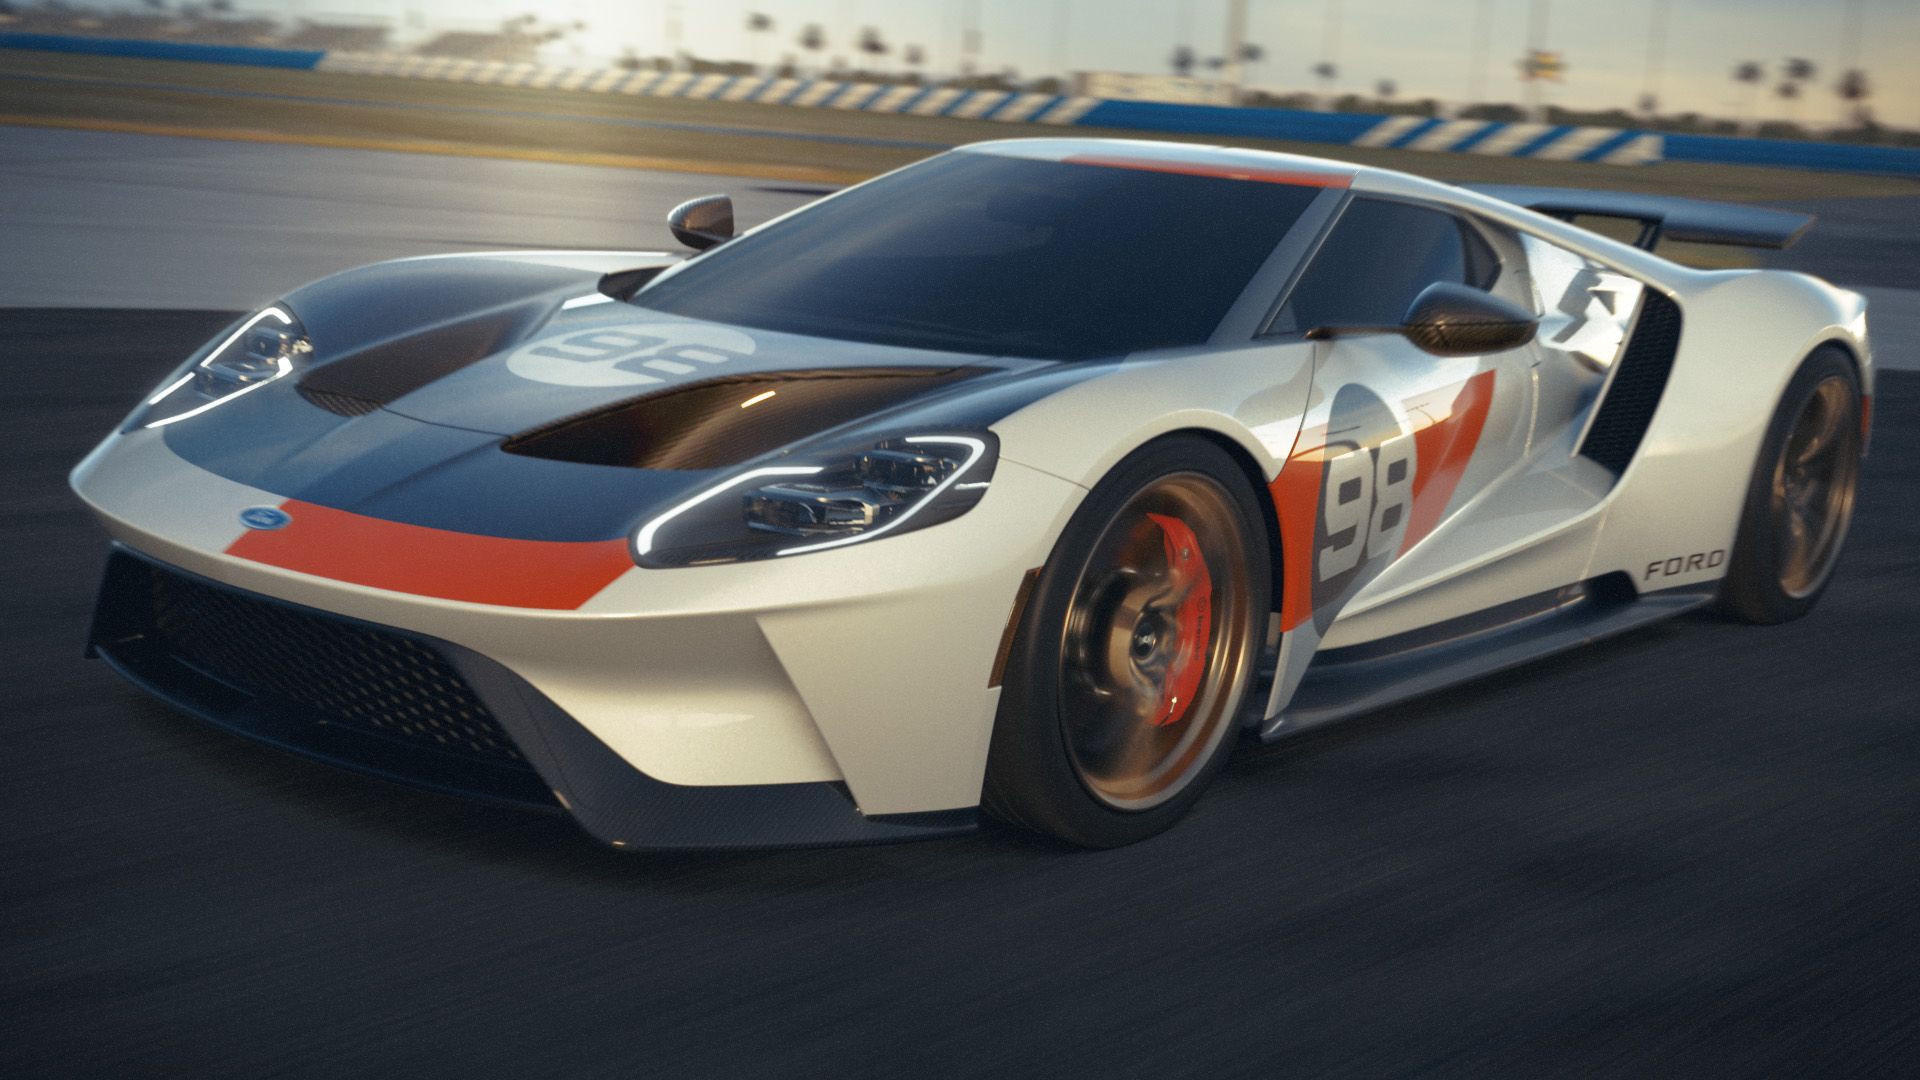 Ford GT Heritage Edition Is Modern Take on 'Ford v Ferrari'